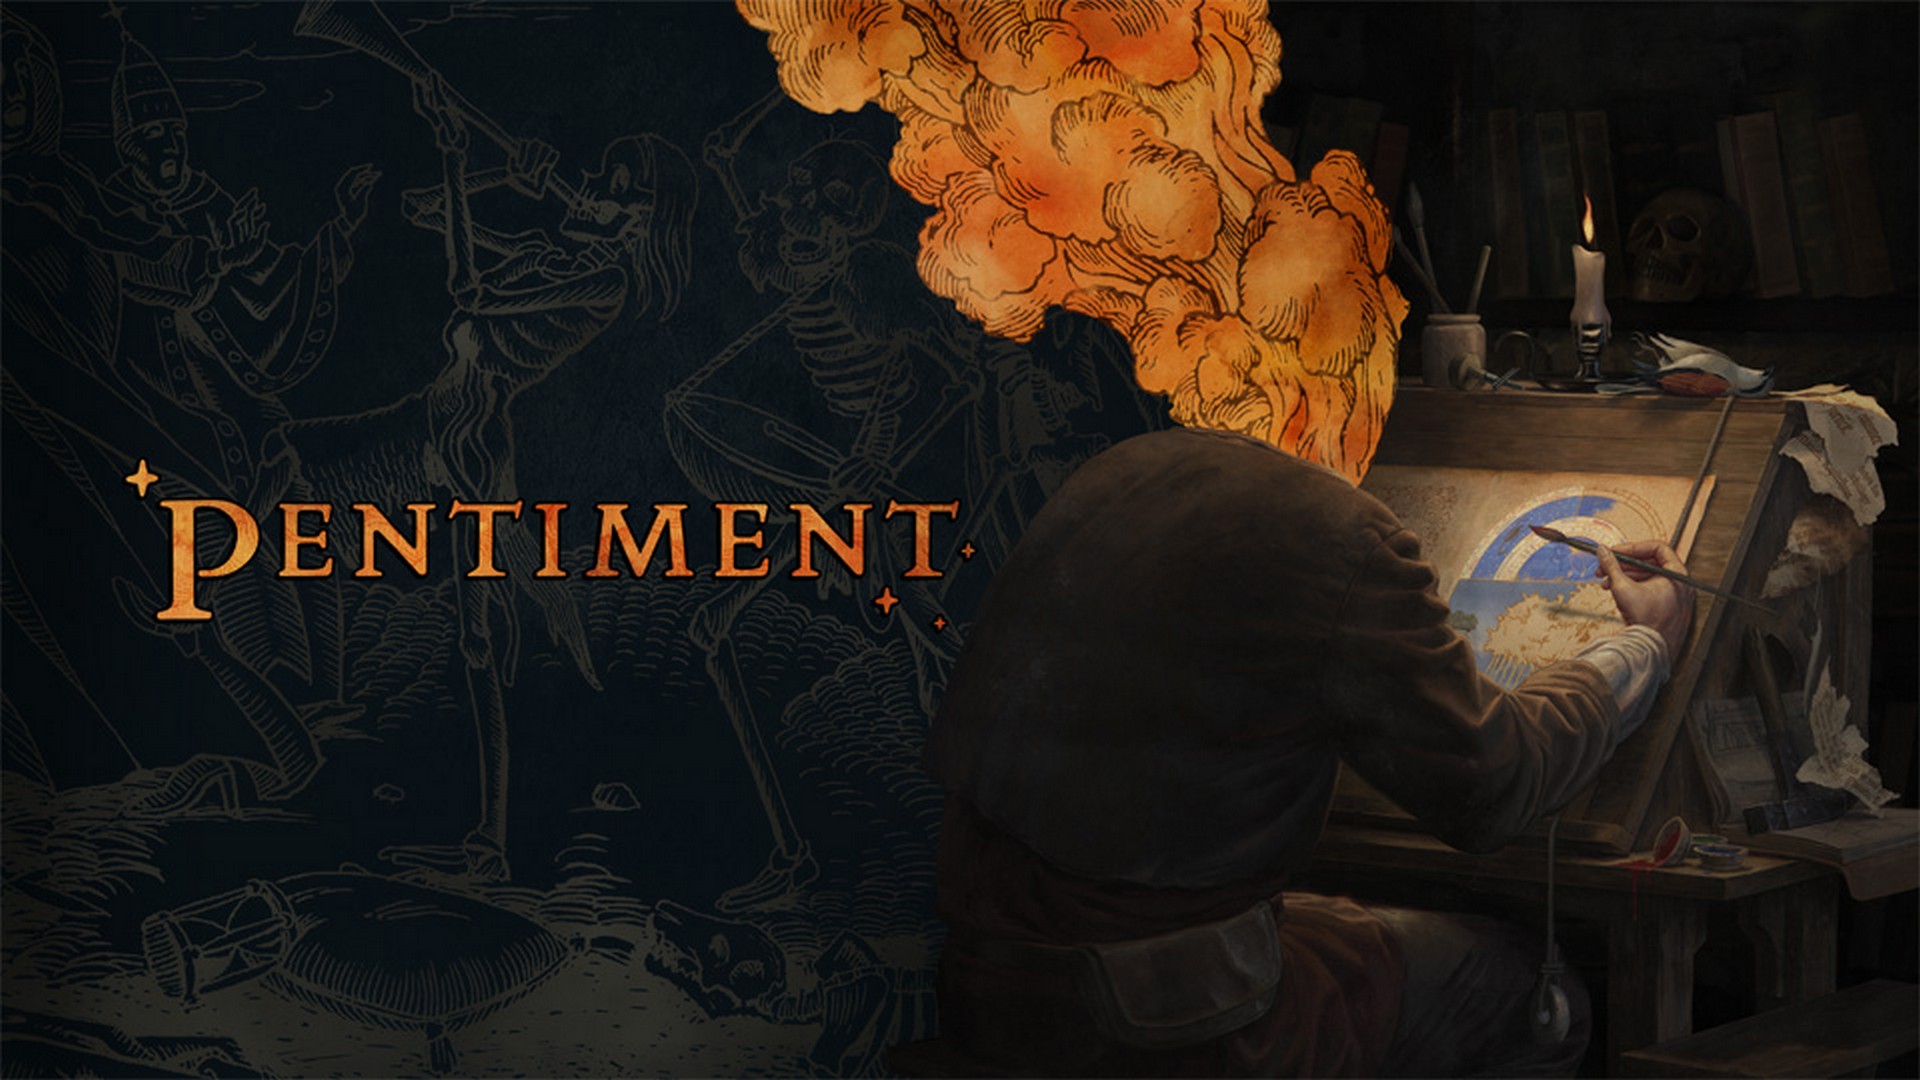 Pentiment Available Now on Nintendo Switch, PlayStation 4 and PlayStation 5